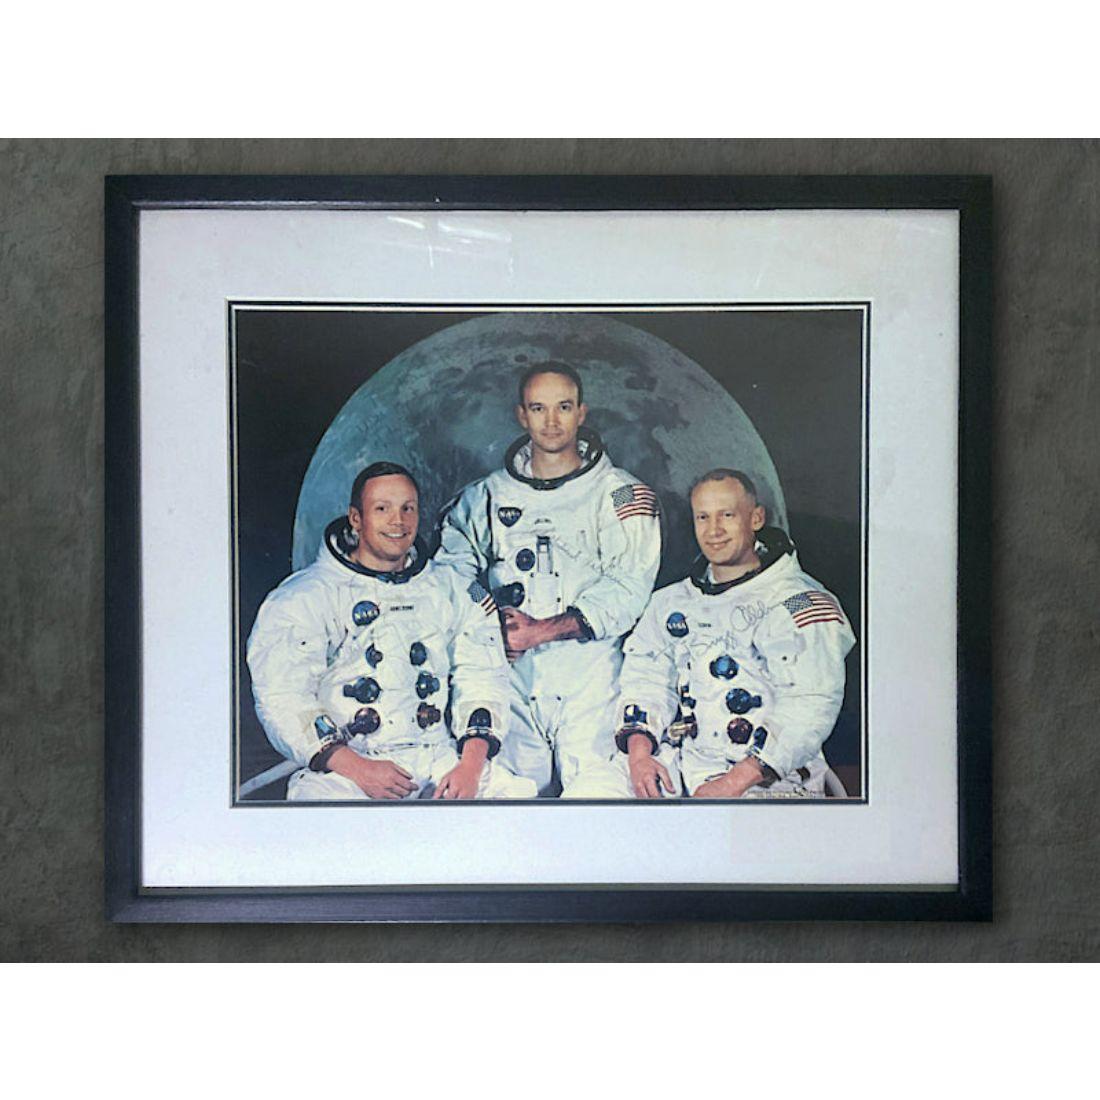 A stunning, oversized Apollo 11 crew photograph signed by Neil Armstrong, Buzz Aldrin and Michael Collins.

This rare oversized Apollo 11 crew signed photograph measures 14